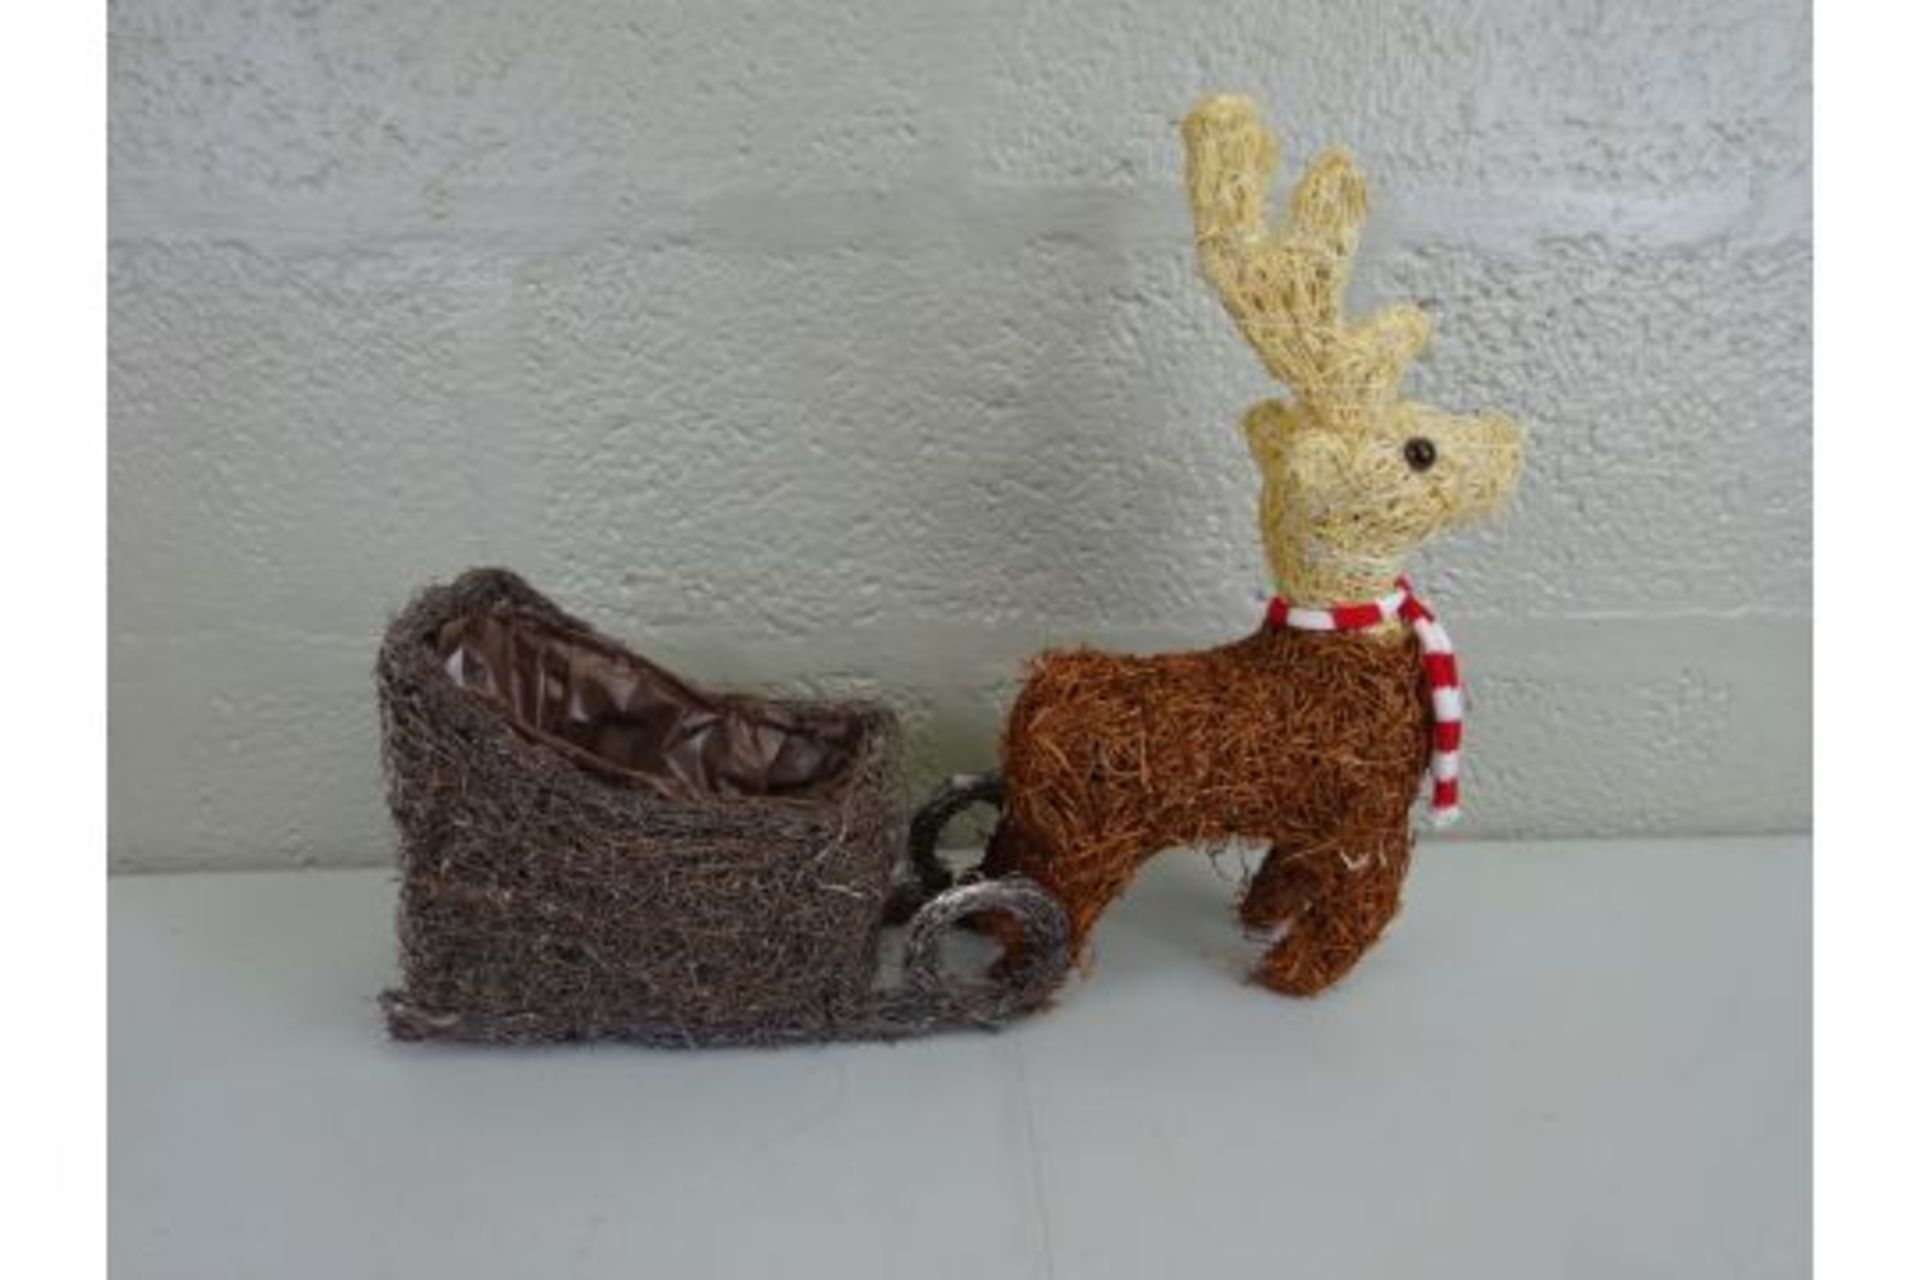 NEW WOVEN REINDEER AND SELIGH PLANTER